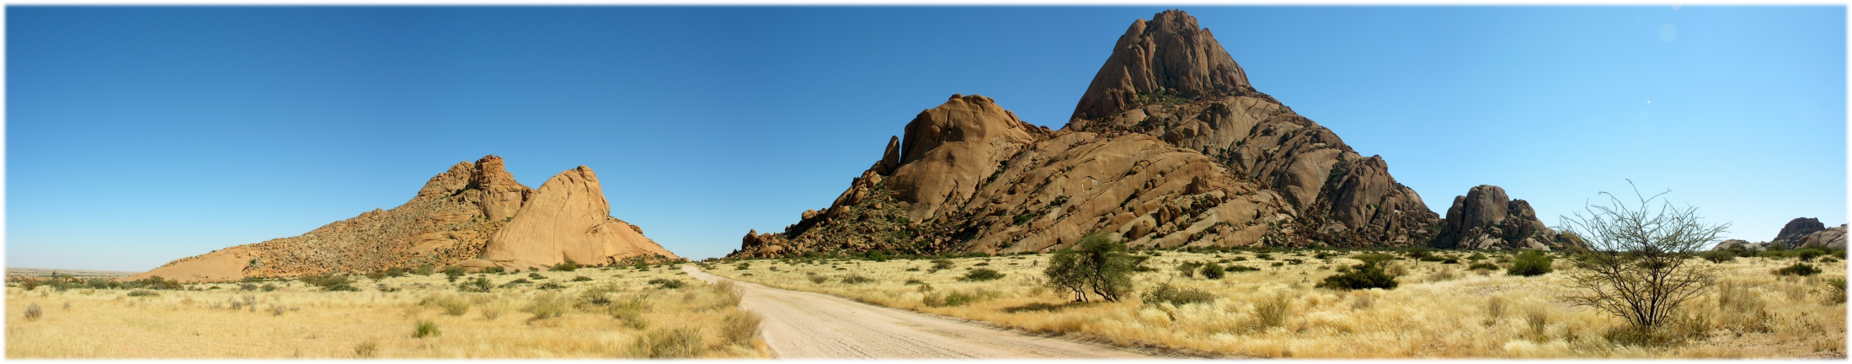 Desert vista with a dirt road between two rock formations.